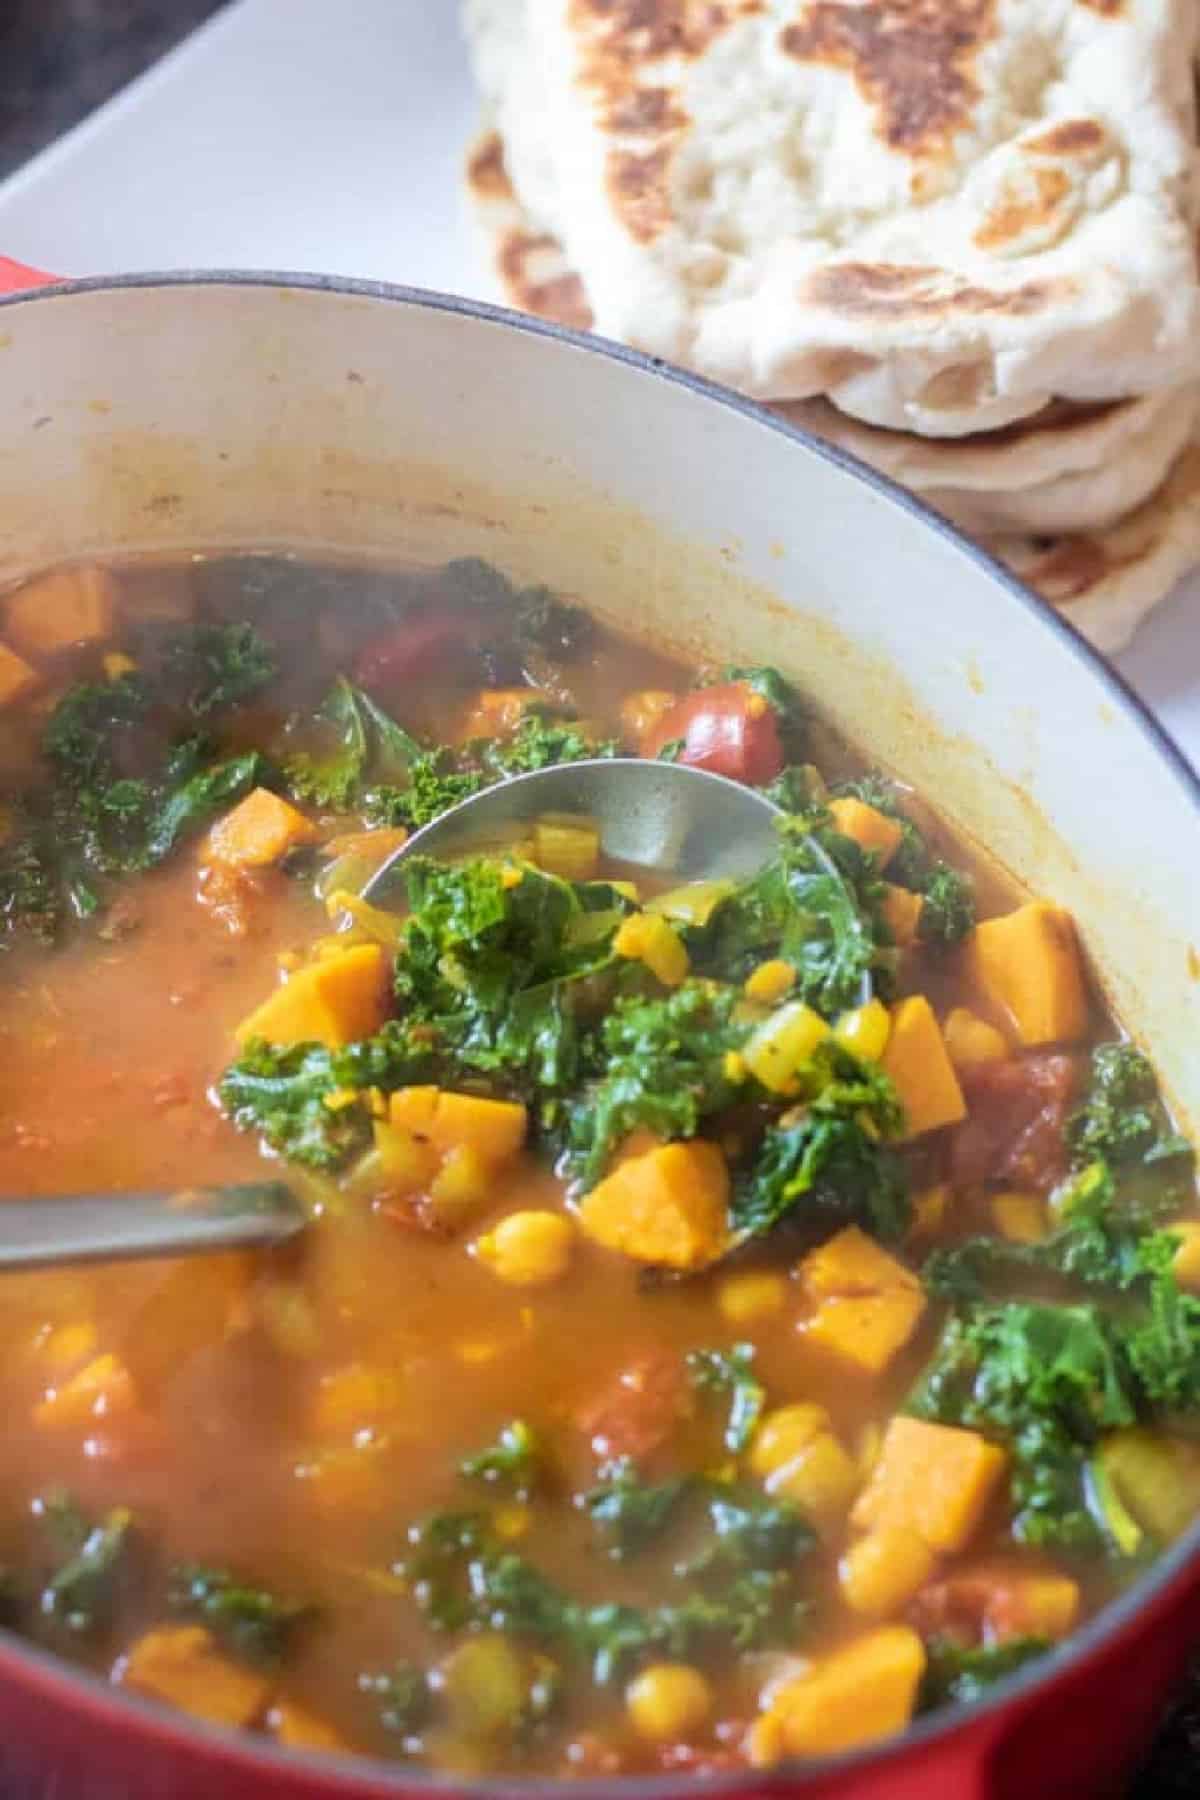 dutch oven of cooked chickpeas, sweet potato, kale soup with ladle.